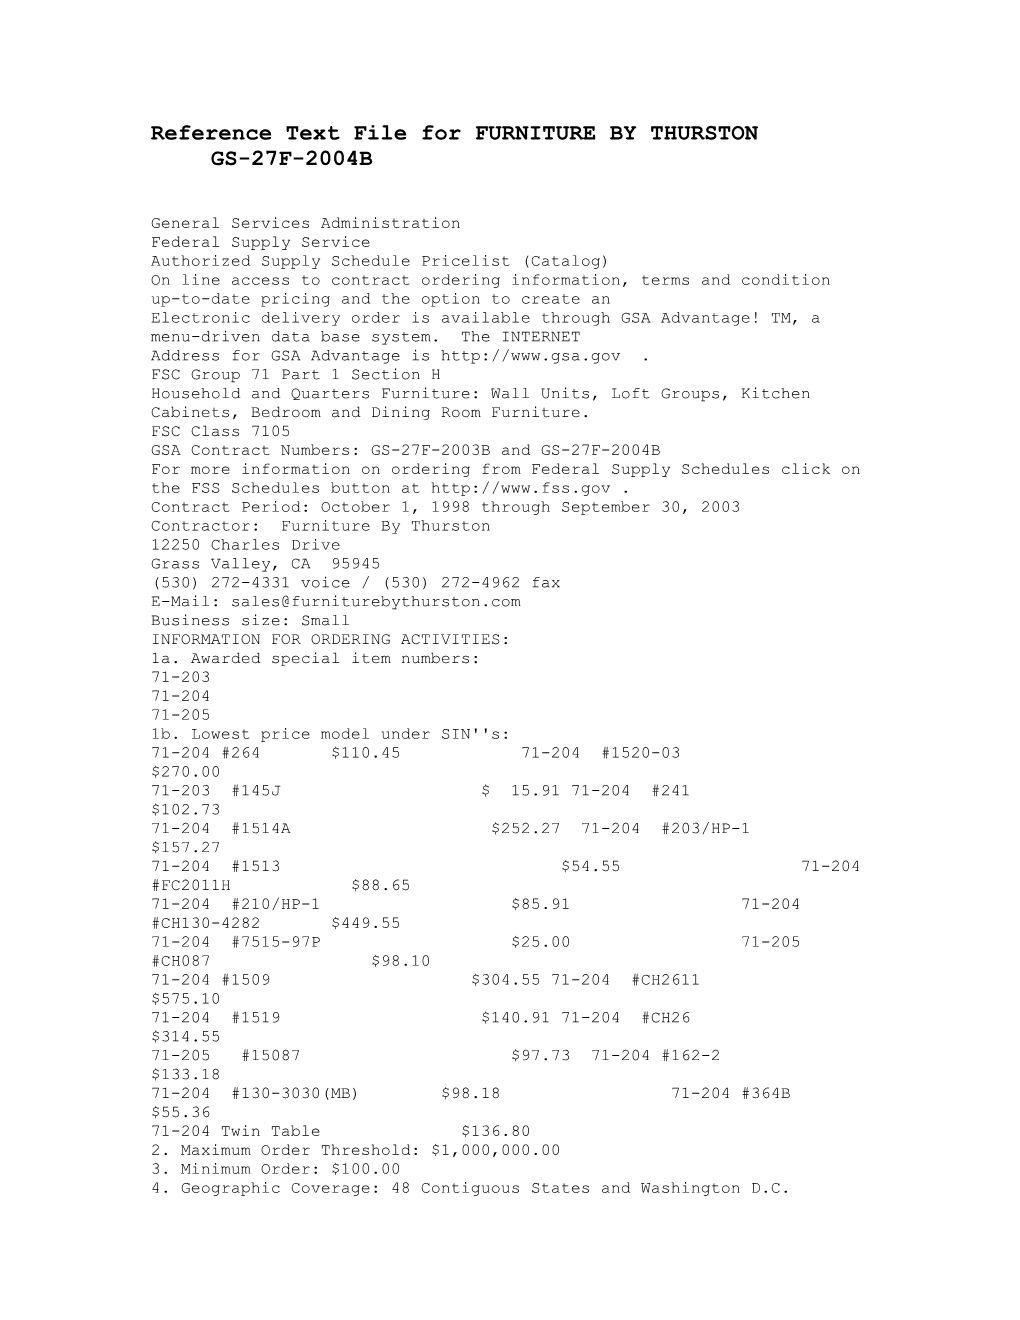 Reference Text File for FURNITURE by THURSTON GS-27F-2004B